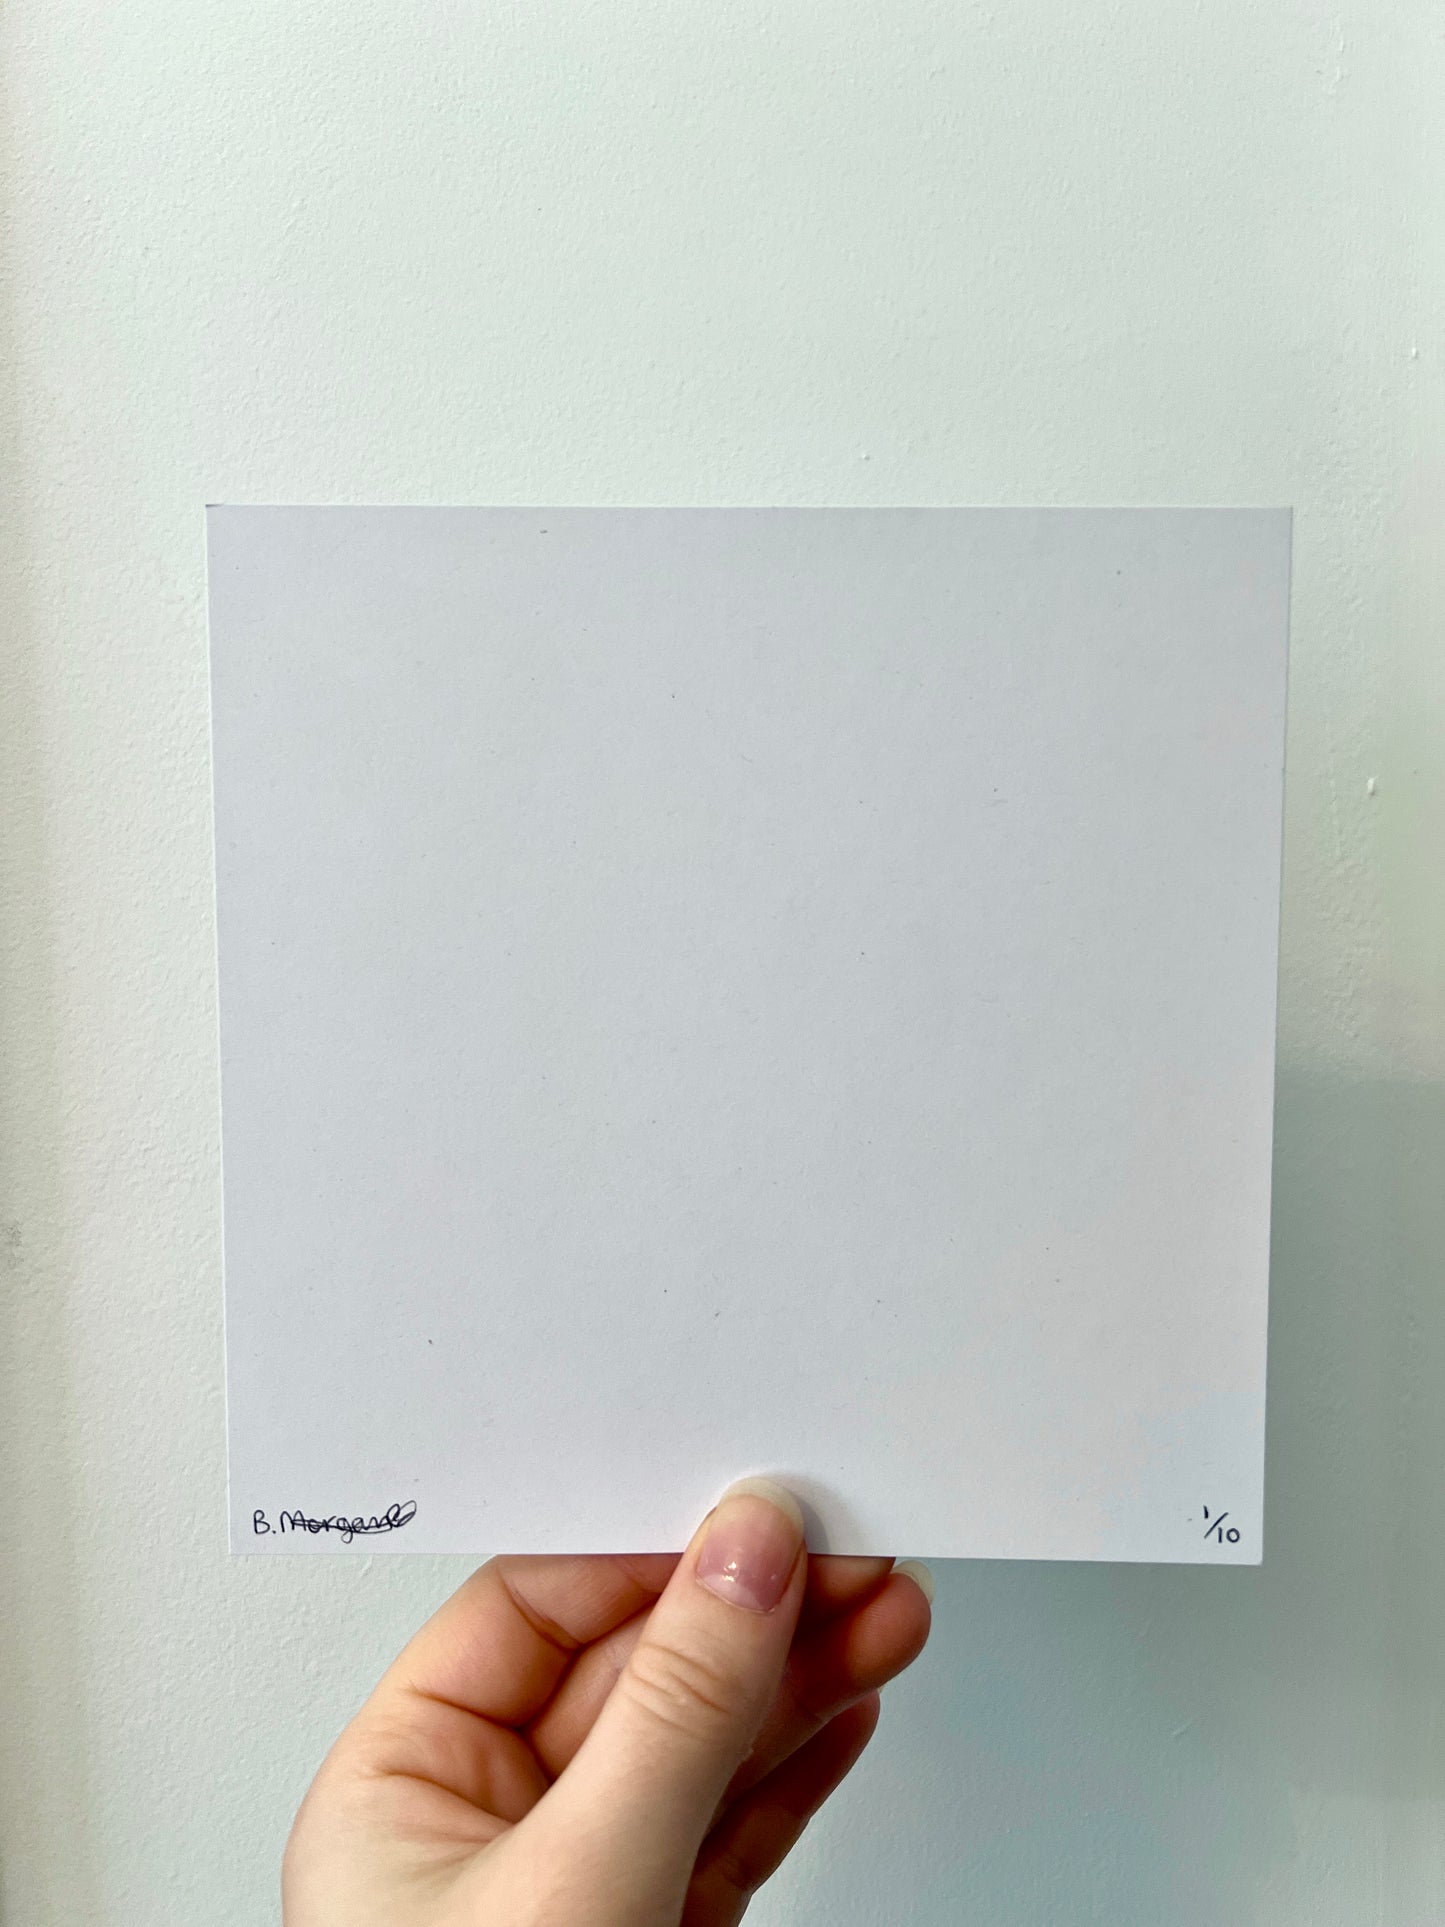 A hand holding the back of a print against a white wall. The print is white and square with a signature in the bottom left corner and a number in the bottom right corner.